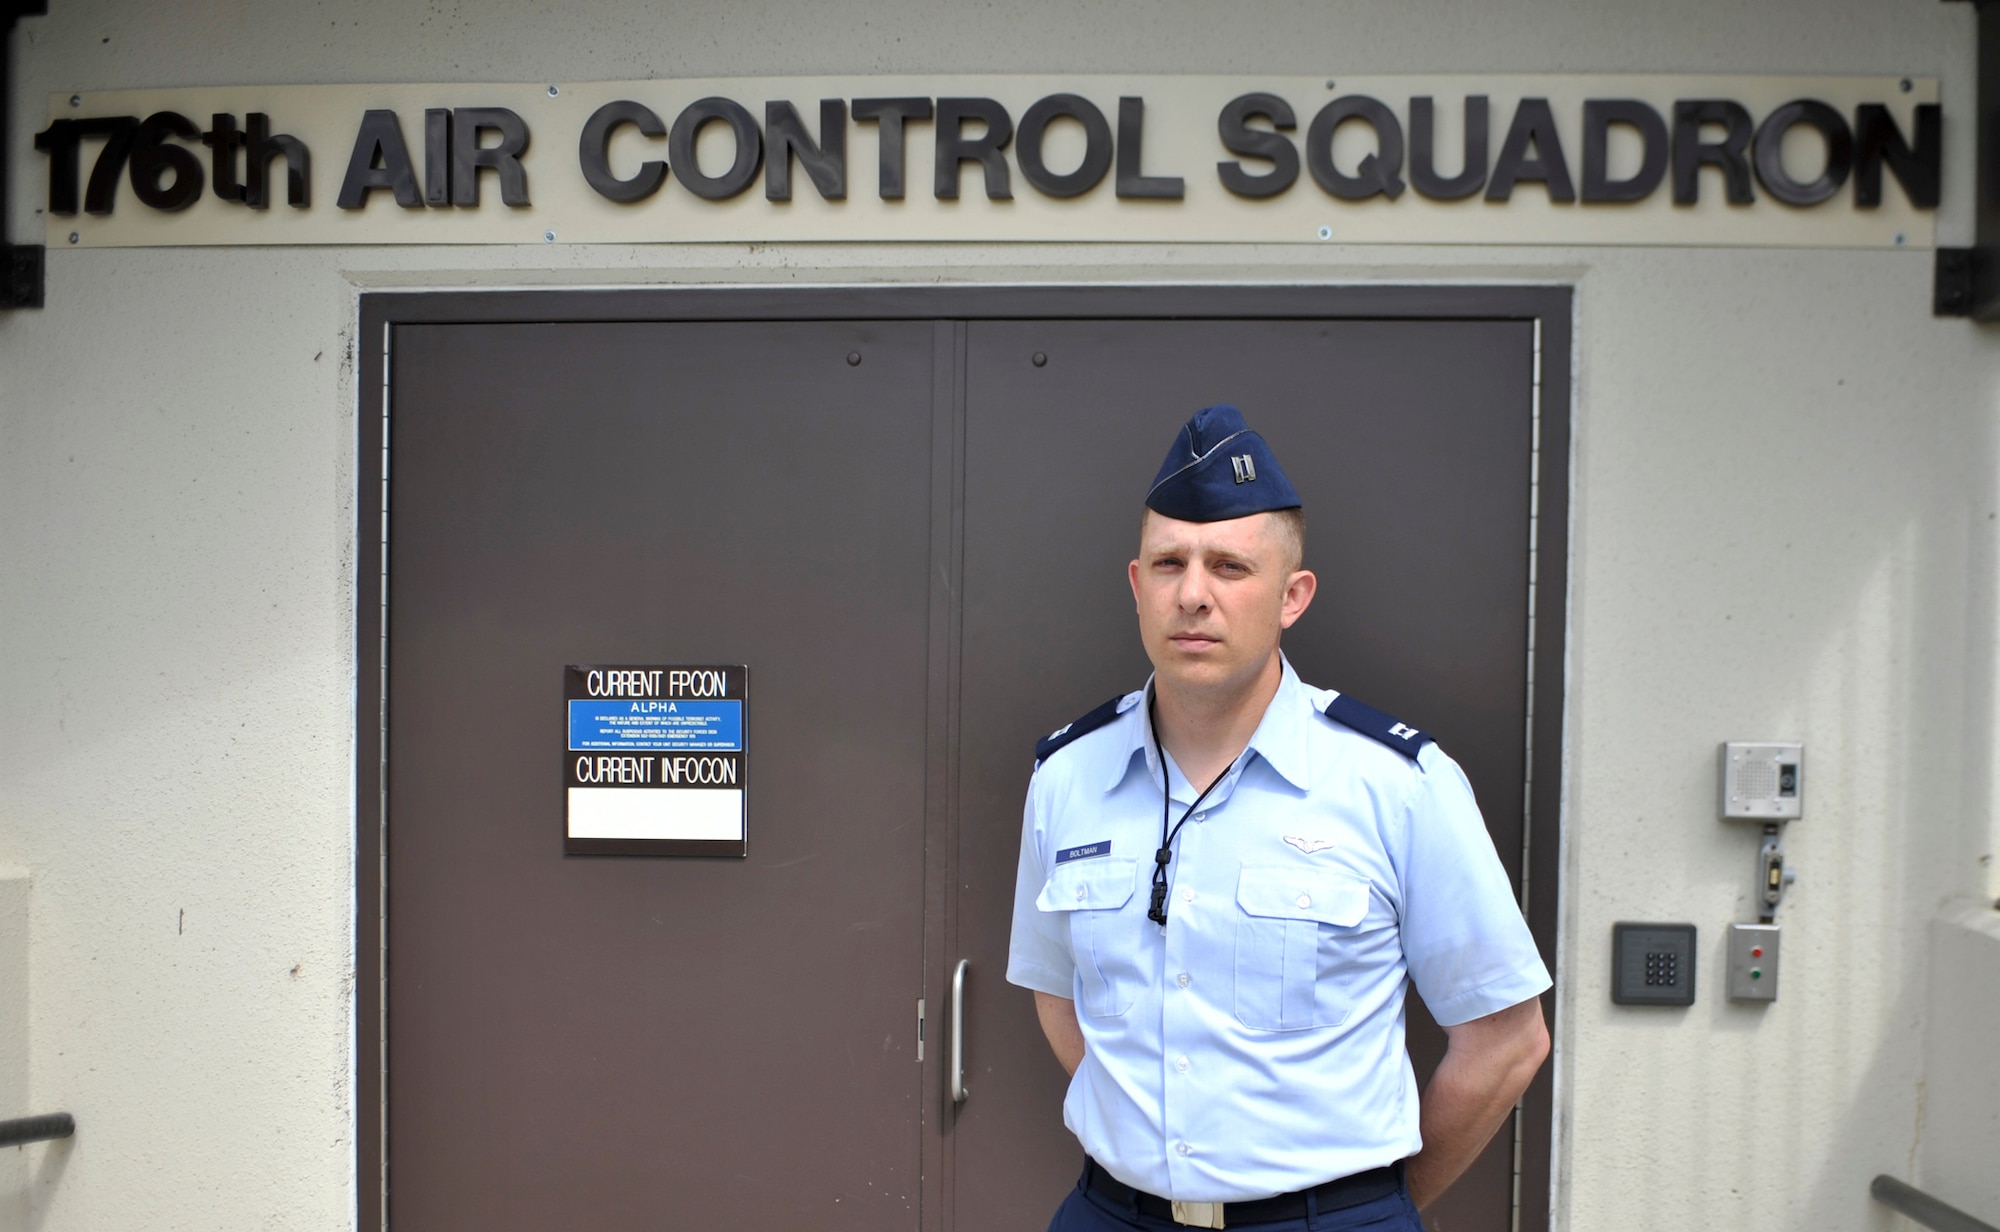 ELMENDORF AIR FORCE BASE, Alaska – Capt. Erik Boltman an air weapons officer with the 176th Air Control Squadron. He works as a combat air traffic controller. (Air Force photo by Airman 1st Class Christopher Gross)